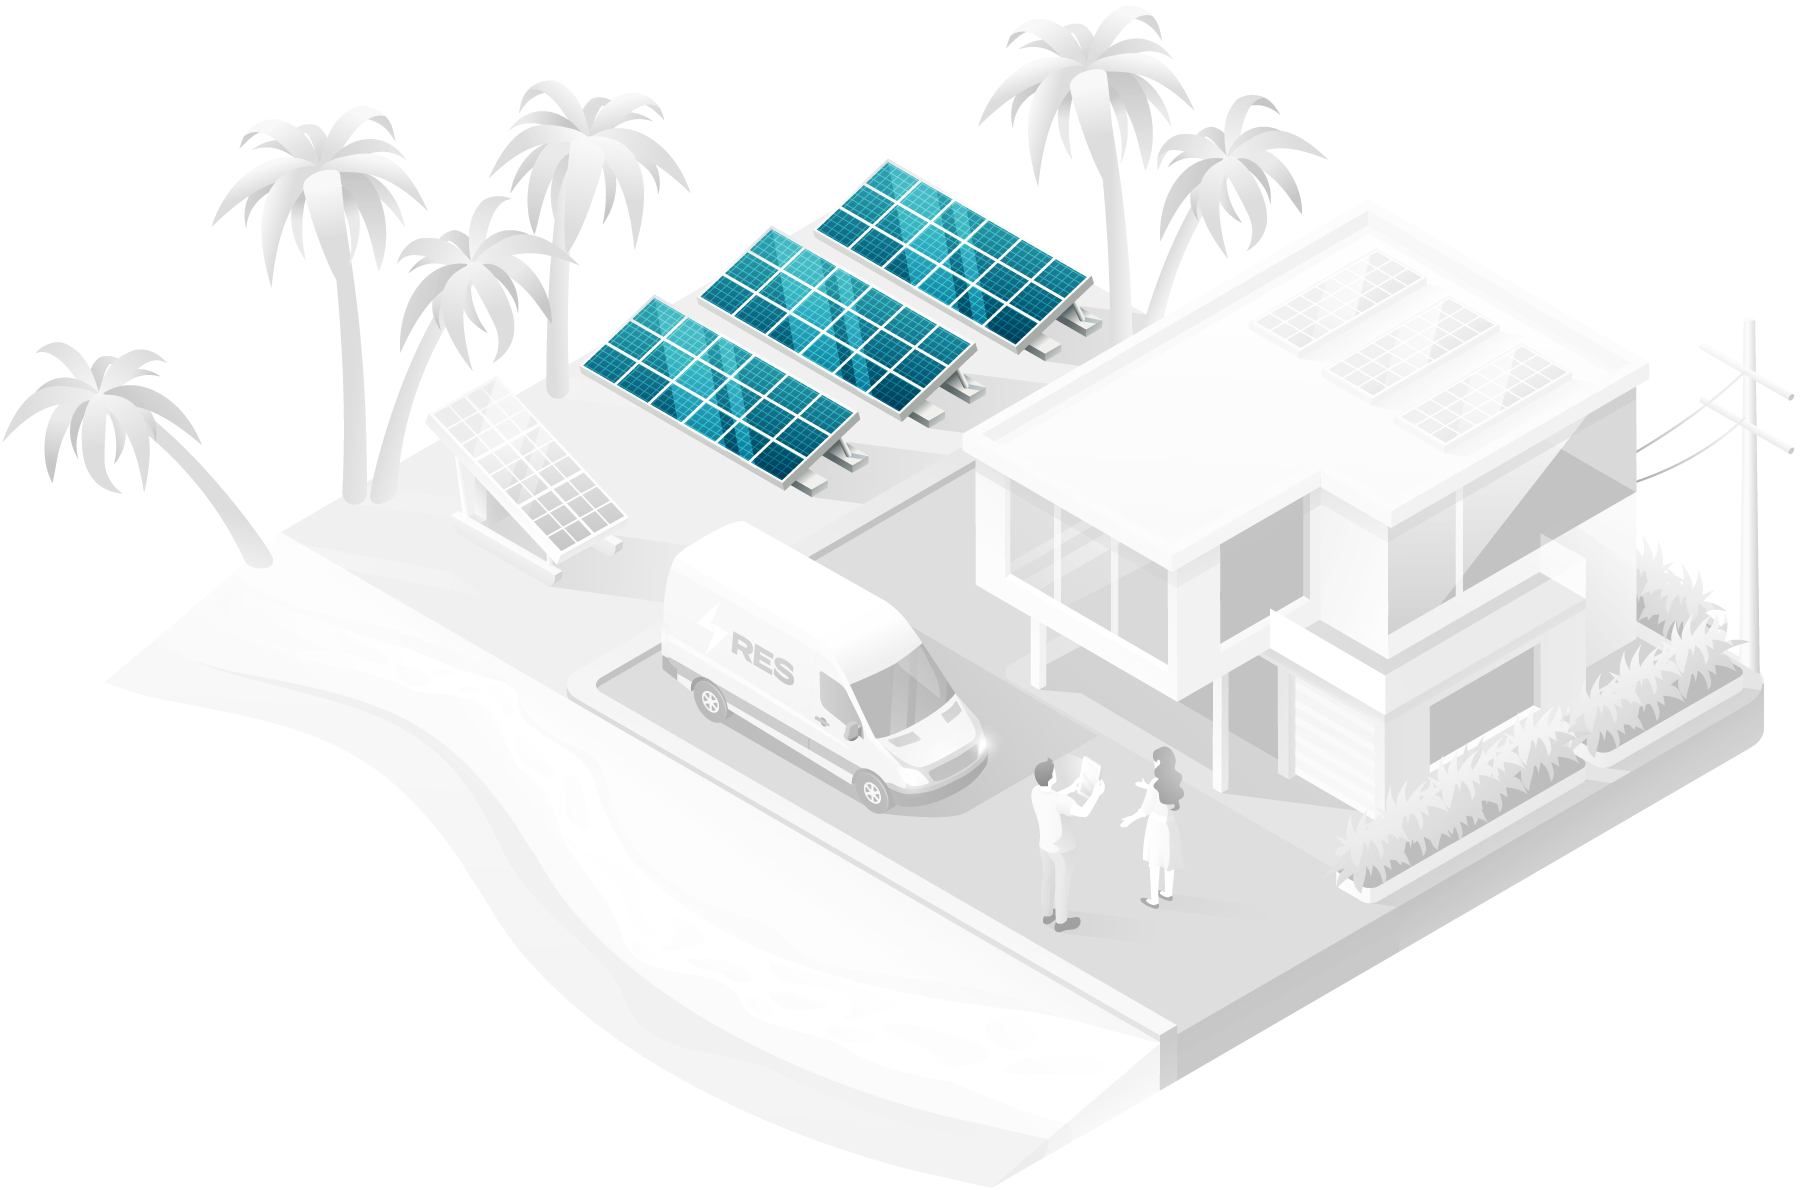 RES Off-Grid Solar PV systems